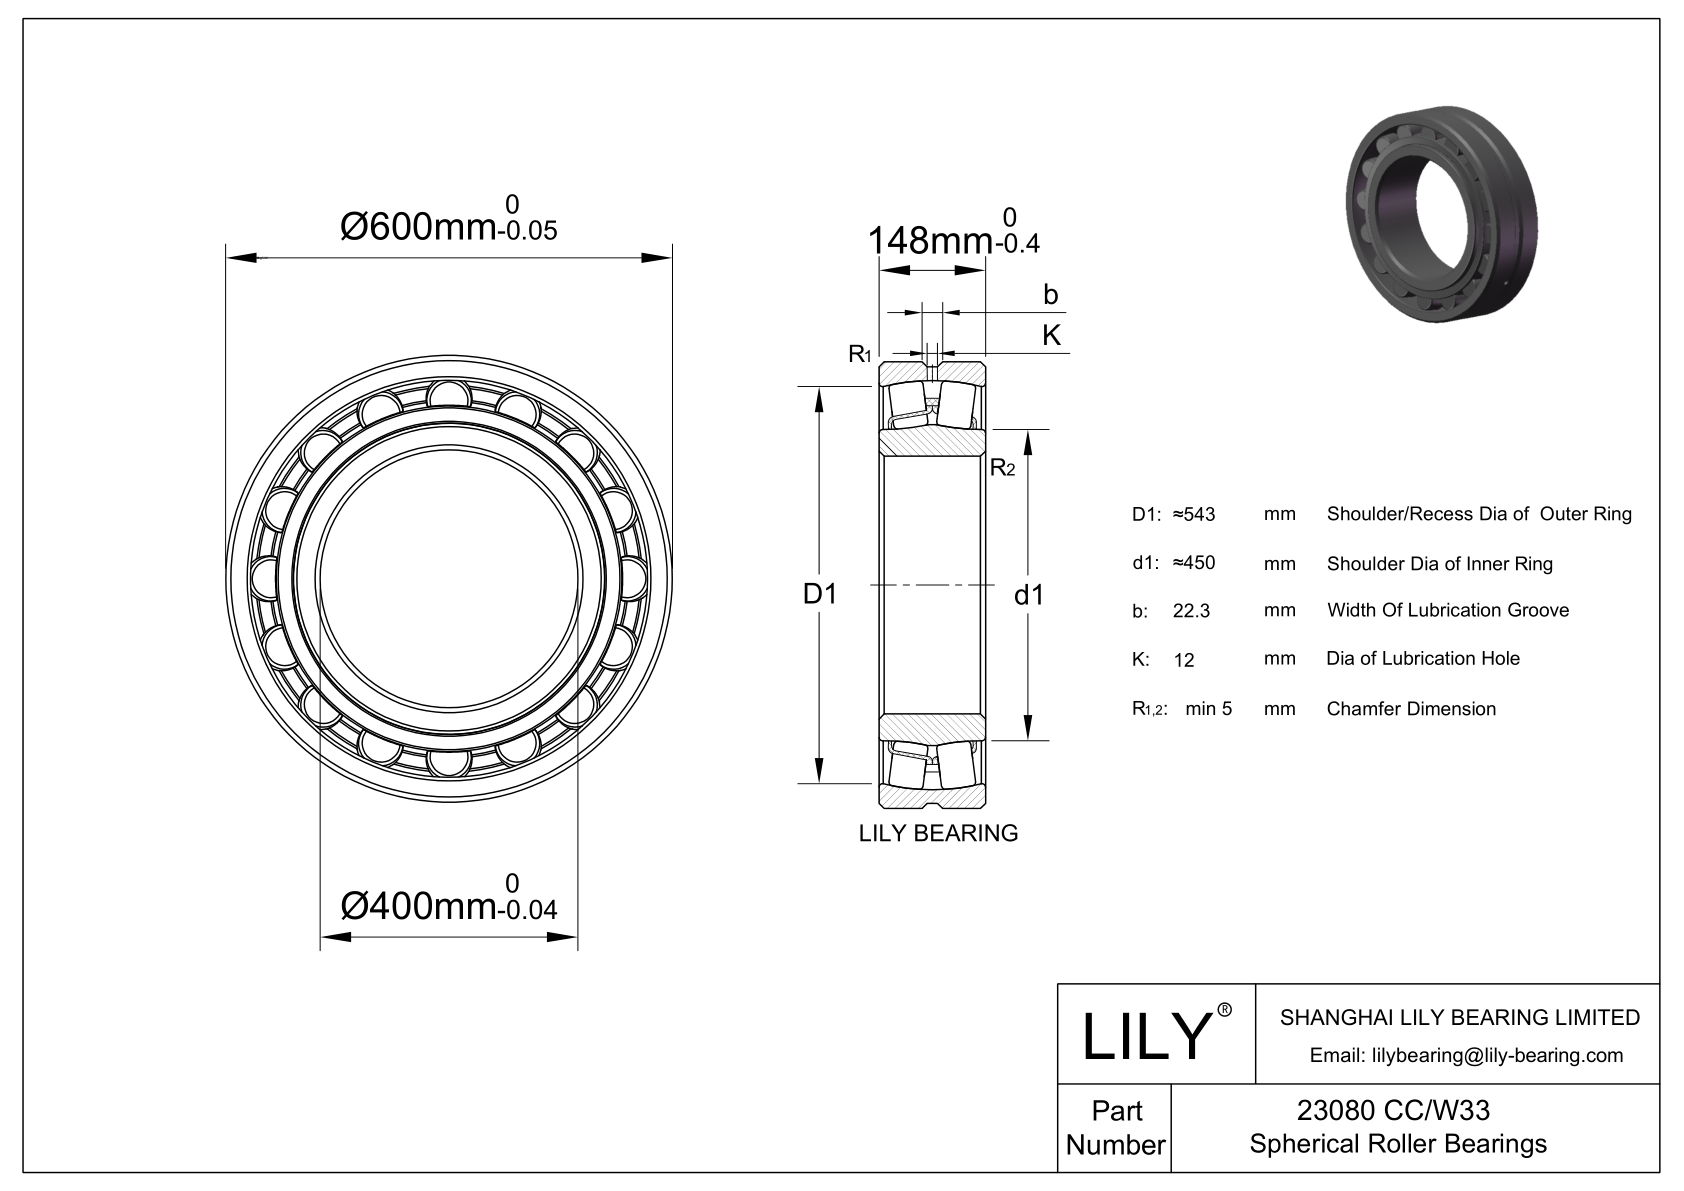 23080 CC/W33 Double Row Spherical Roller Bearing cad drawing